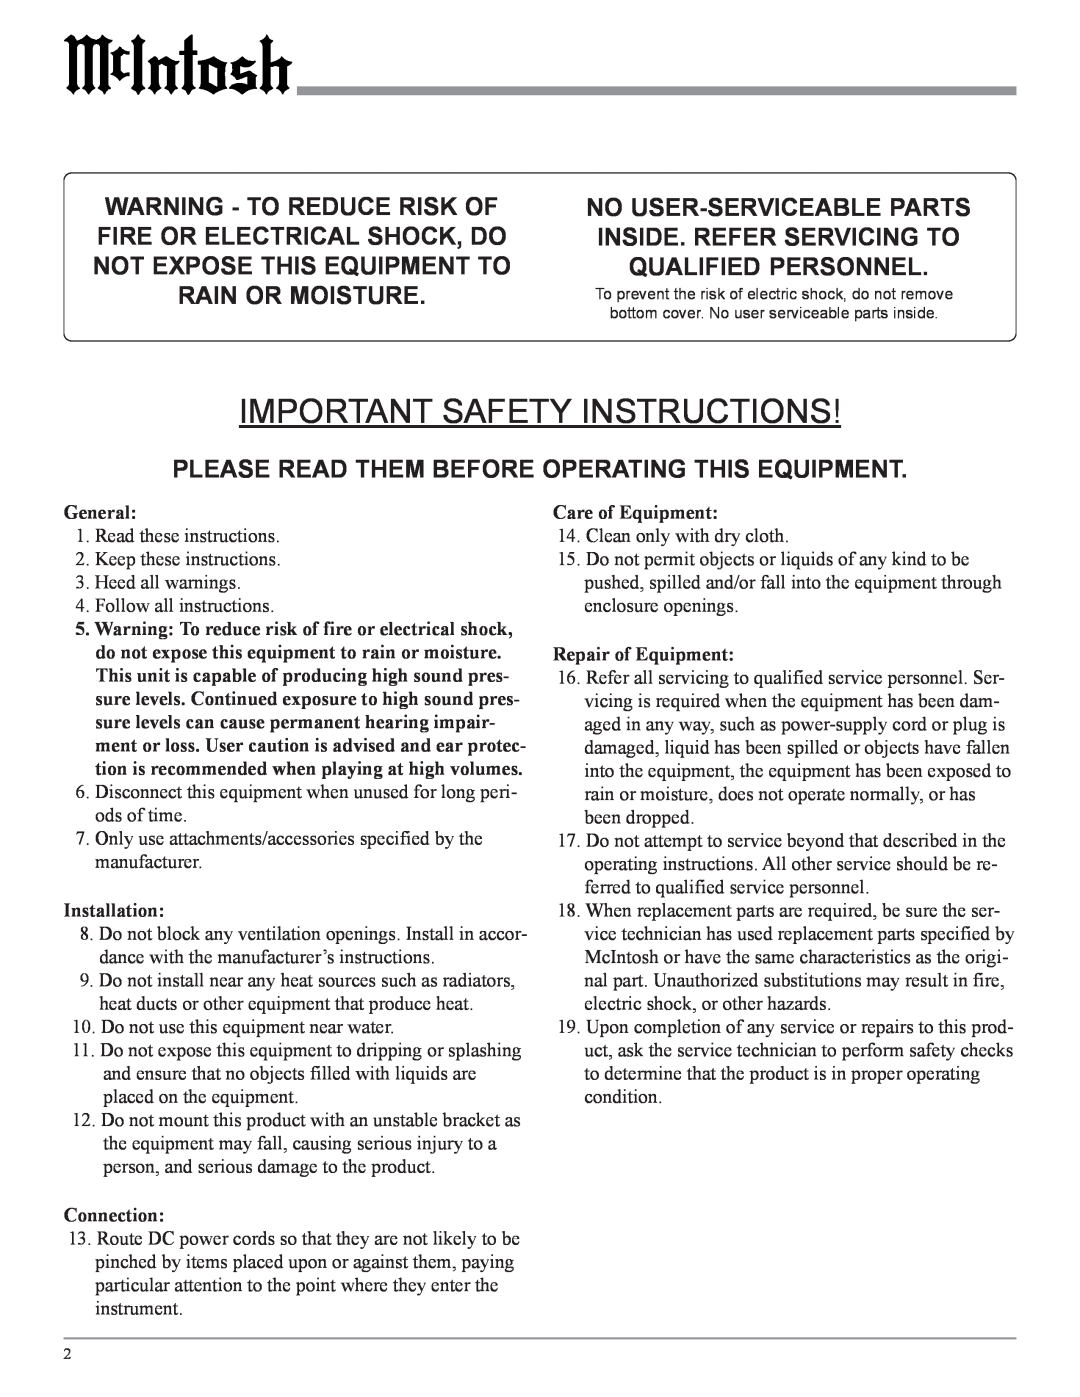 McIntosh MCC302M Important Safety Instructions, Please Read Them Before Operating This Equipment, No User-Serviceableparts 